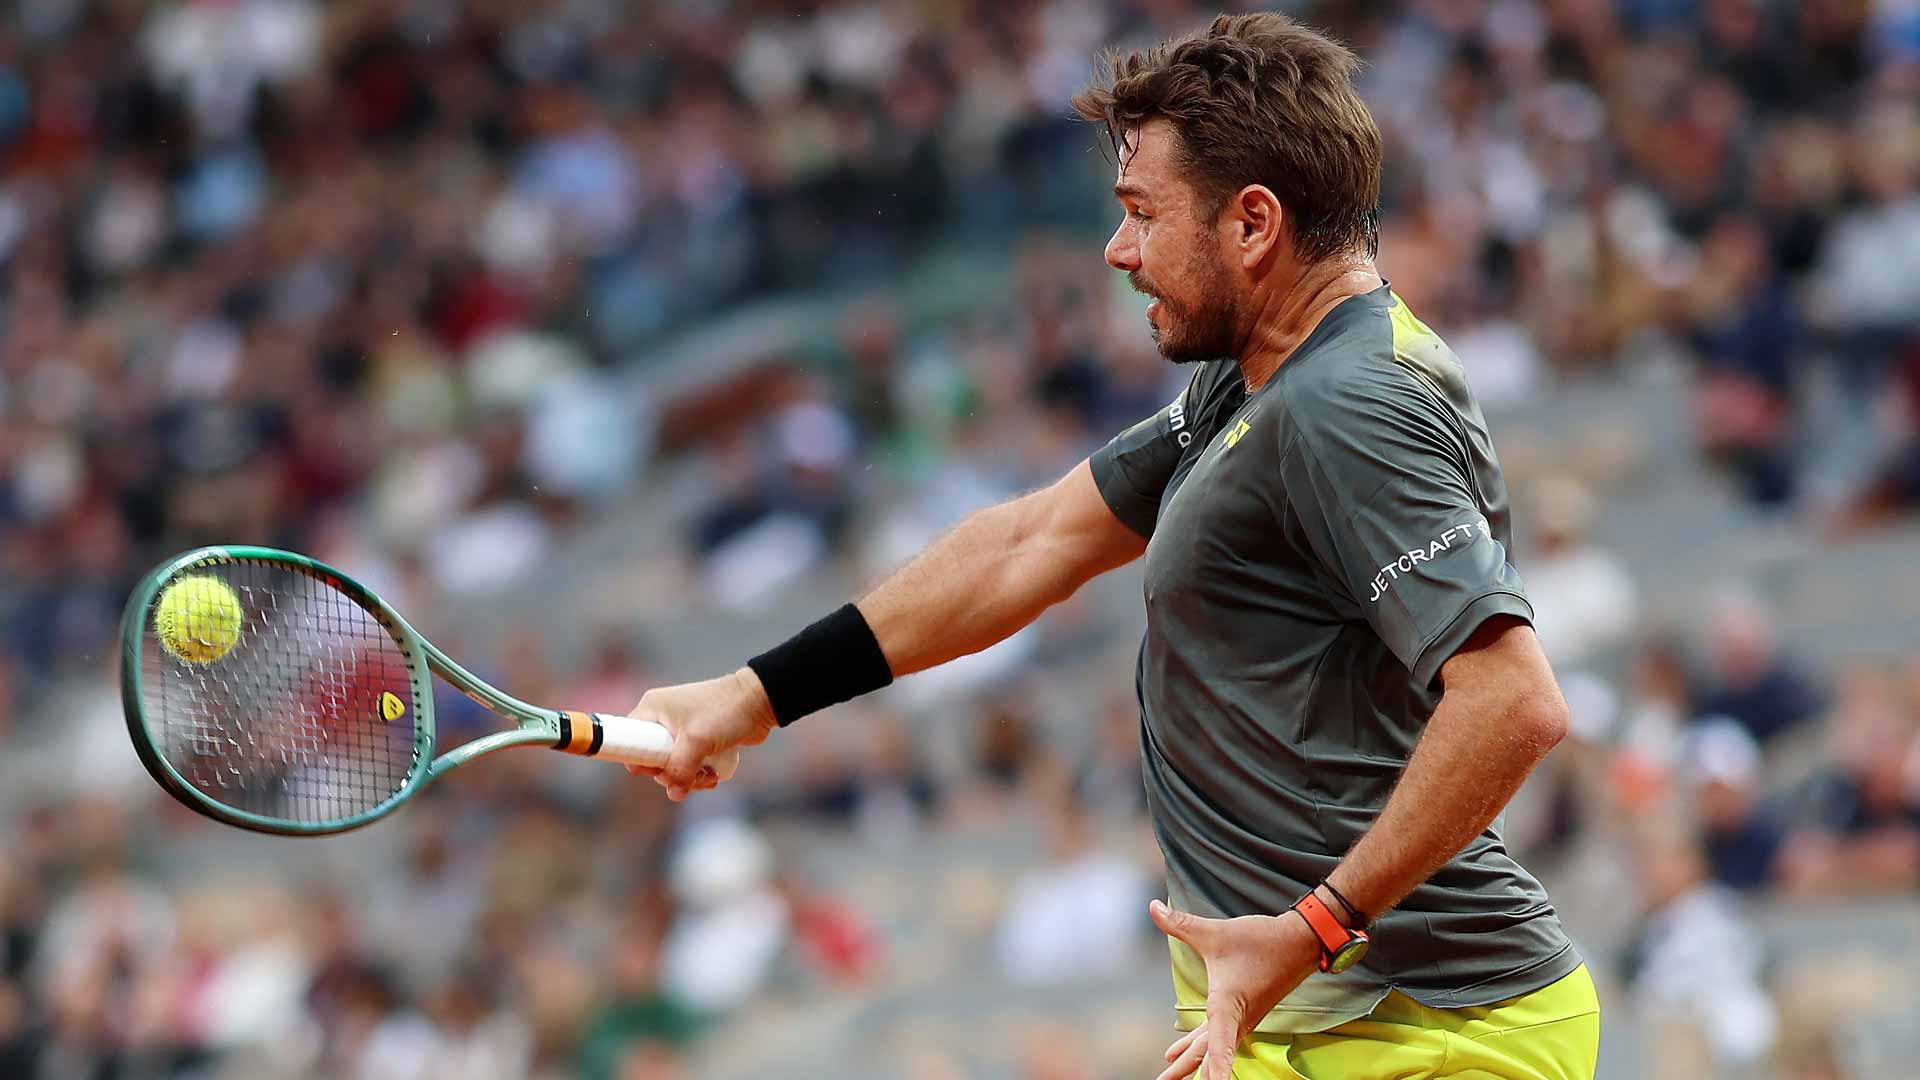 Stan Wawrinka defeats Andy Murray on Sunday in Paris for his 10th win in their Lexus ATP Head2Head series (13-10 Murray).